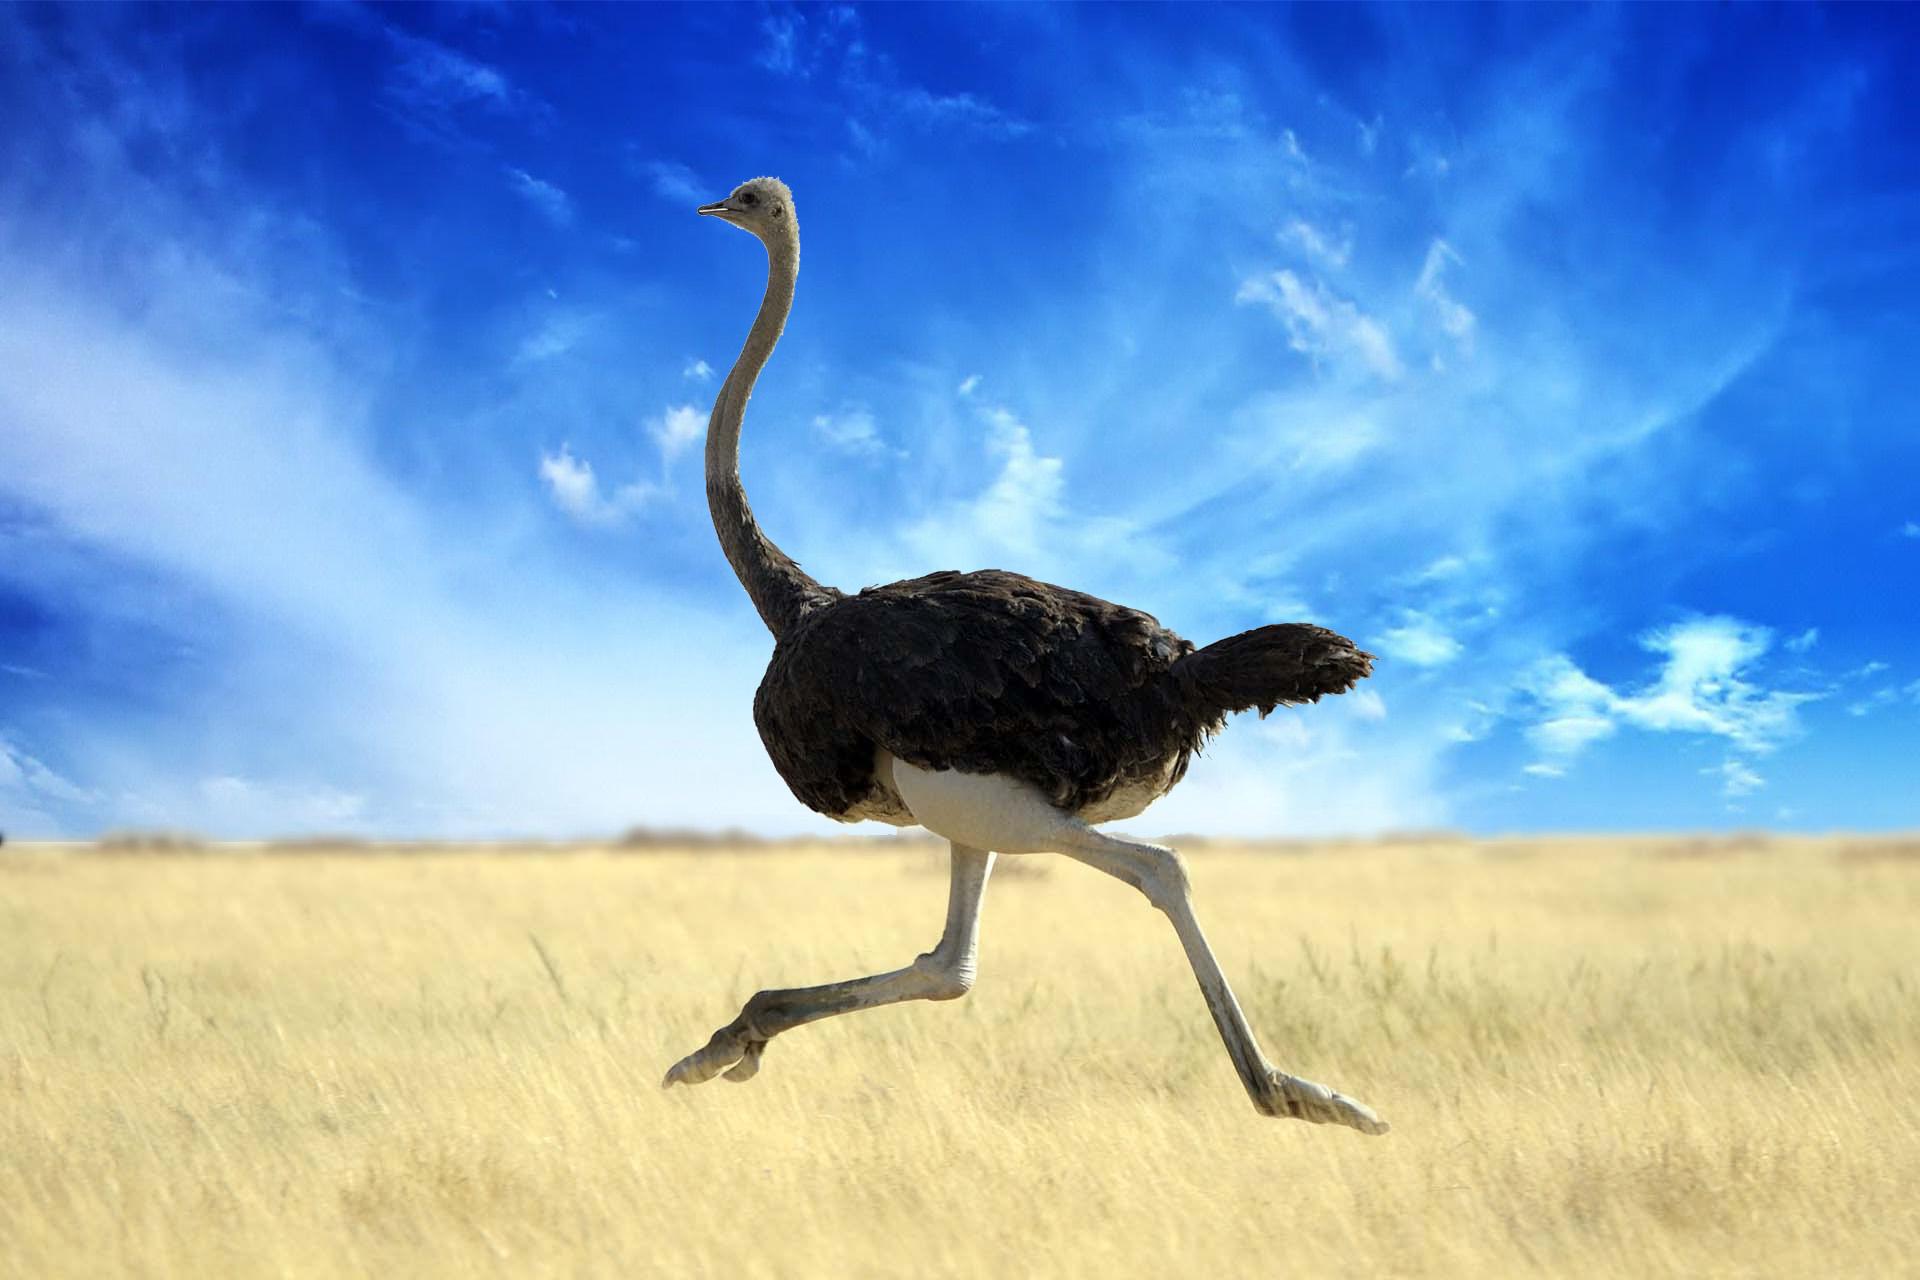 Ostrich Wallpapers High Quality Download Free HD Wallpapers Download Free Images Wallpaper [wallpaper981.blogspot.com]